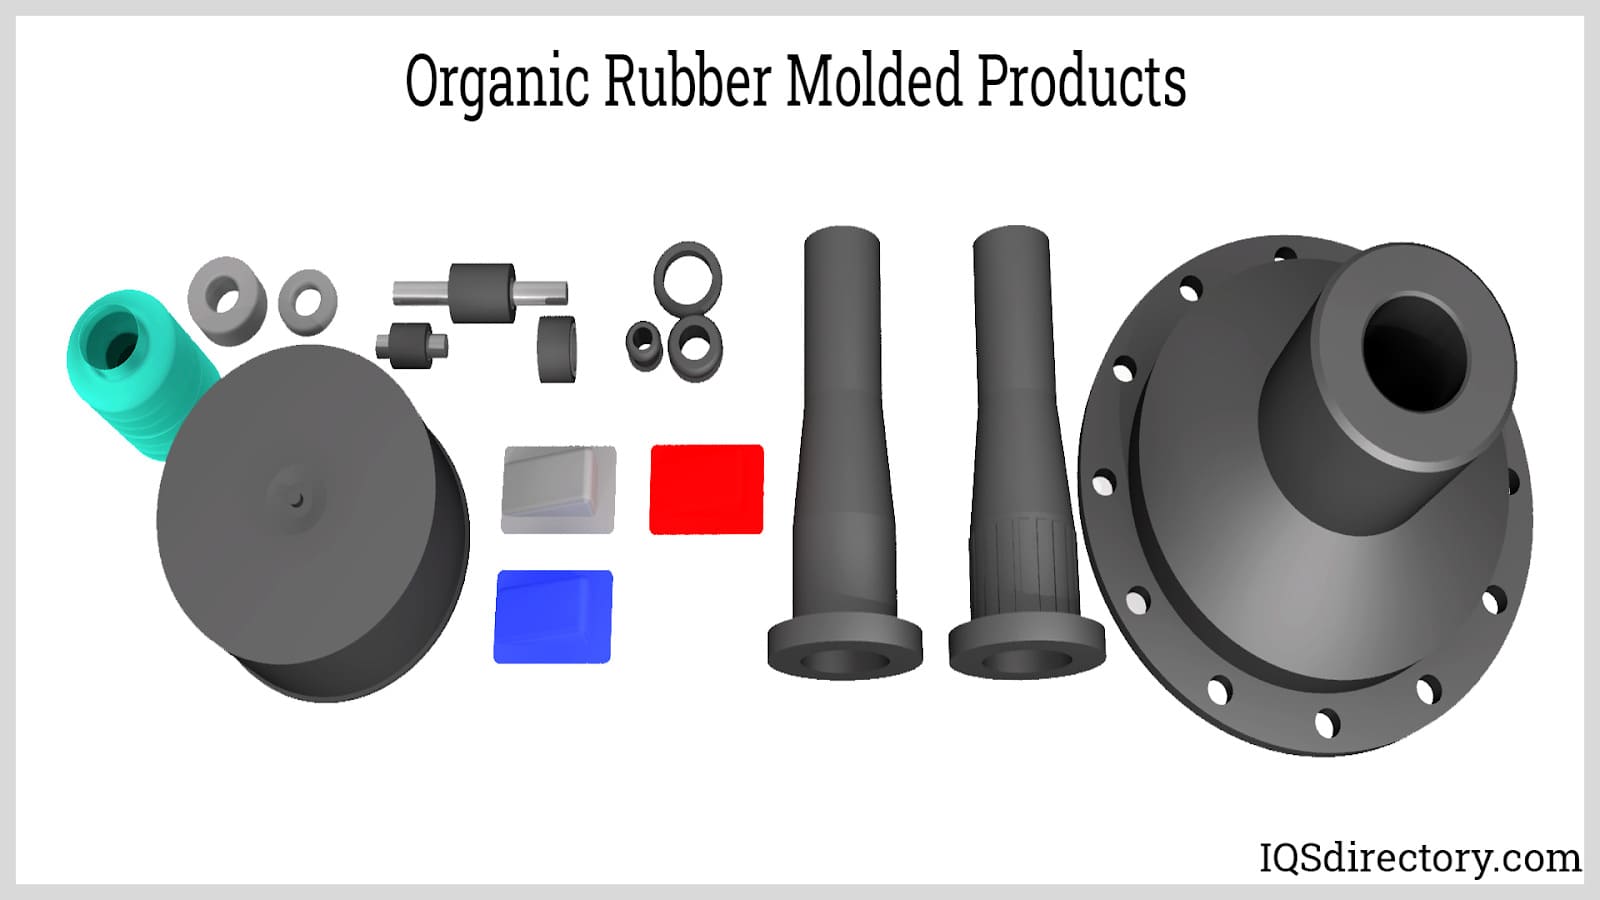 Organic Rubber Molded Products